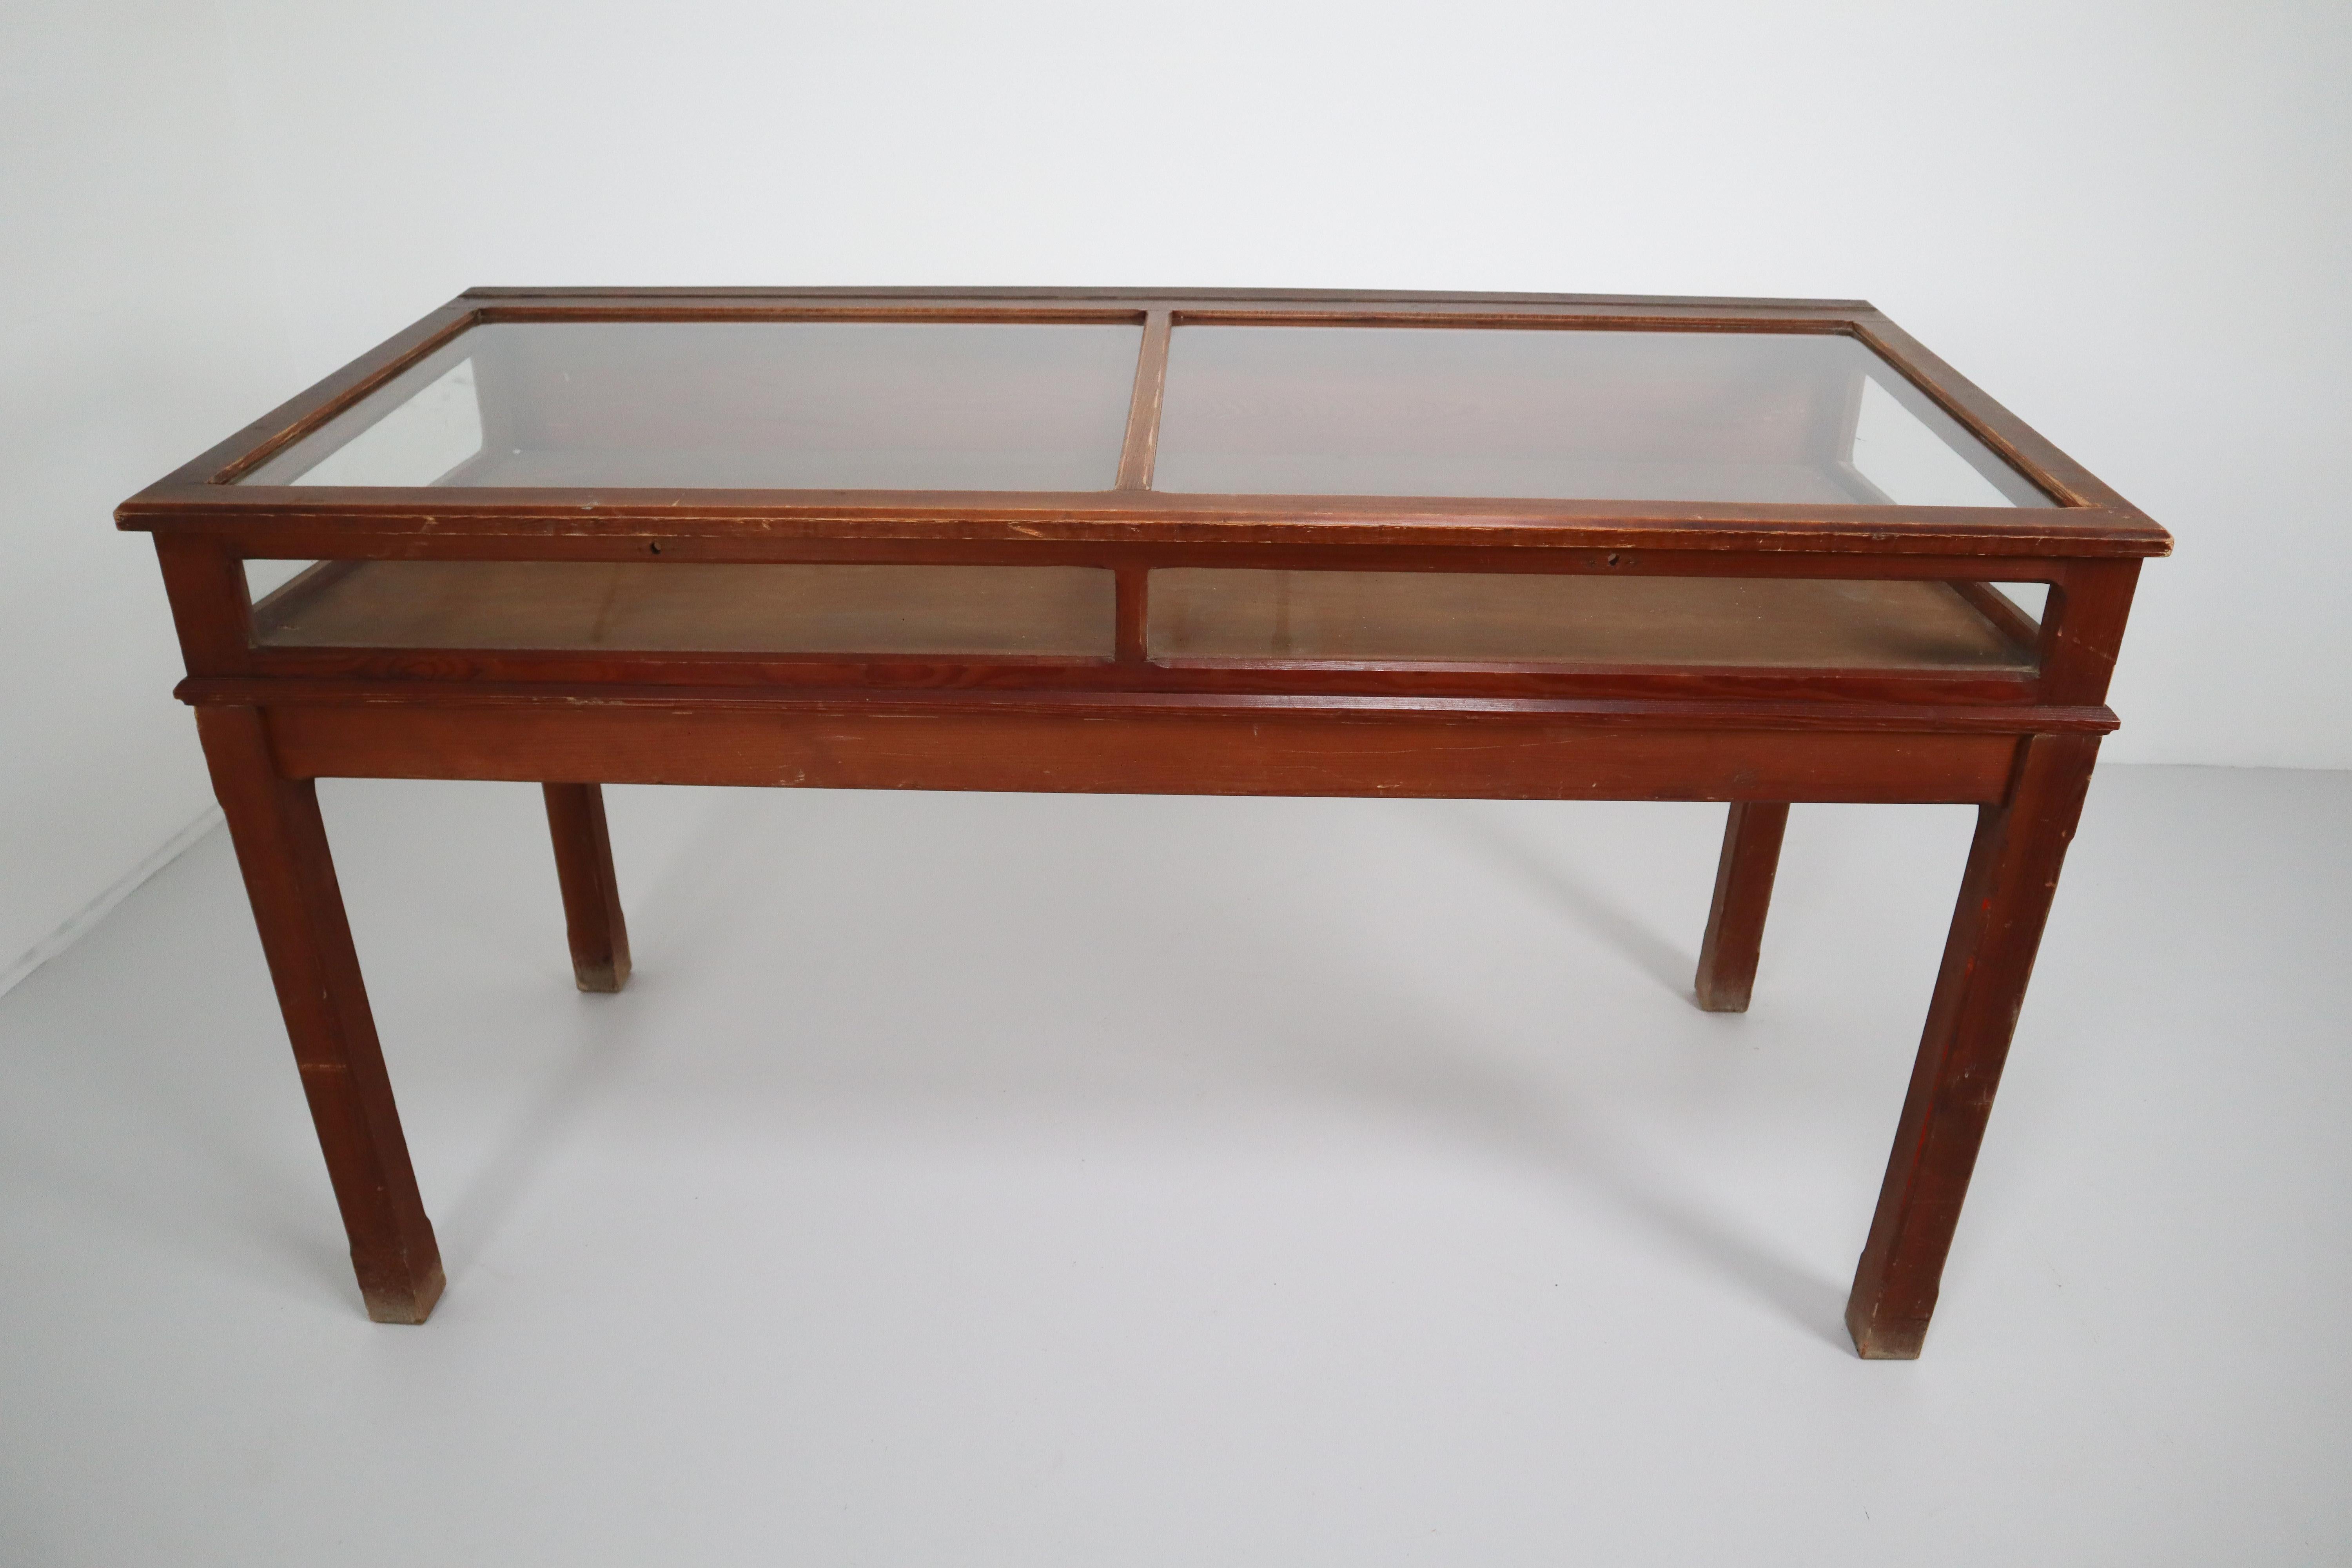 Large display table vitrine in patinated pine and glass in good original condition, France 1920s.